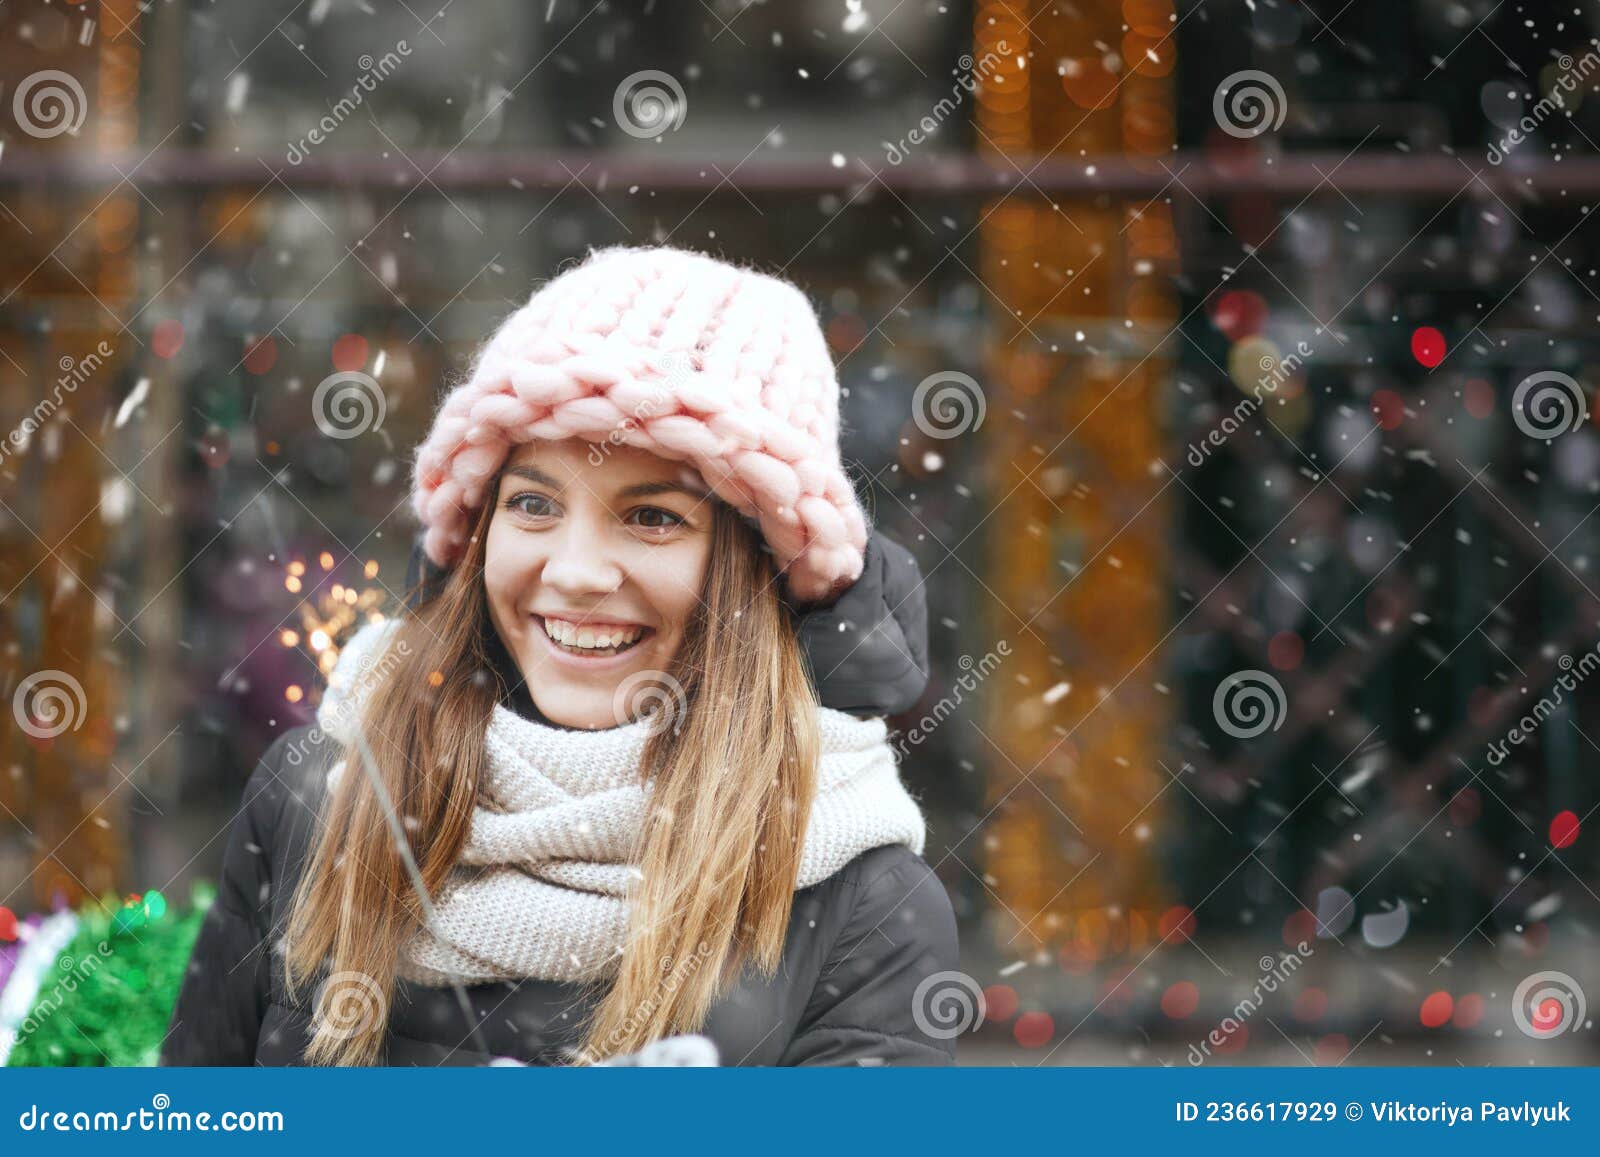 Joyful Lady Playing with Sparklers during the Snowfall Stock Image ...